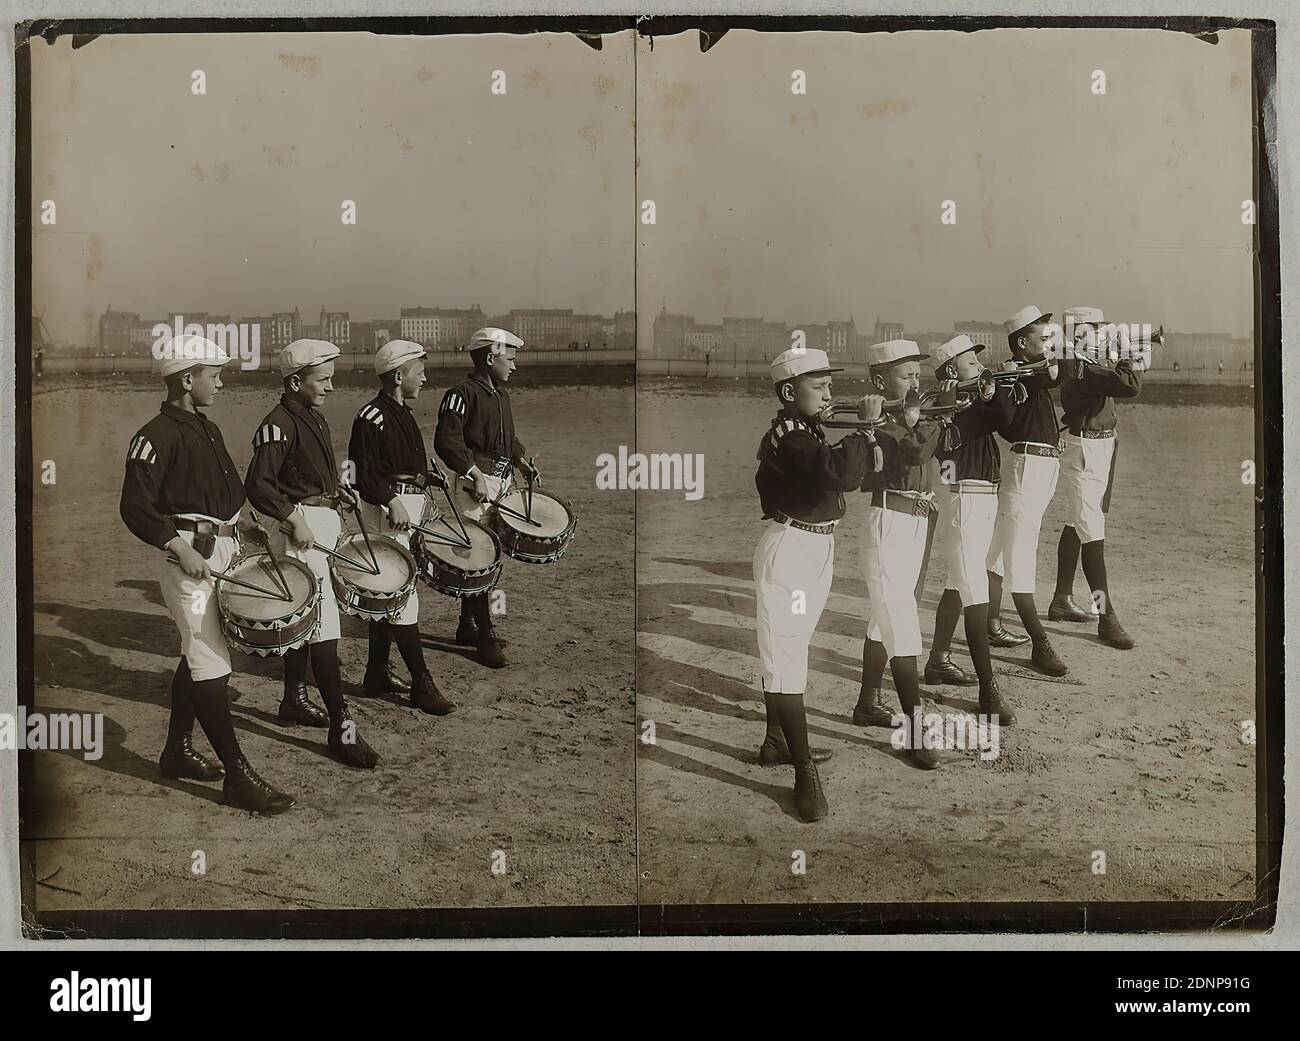 Heinrich Hamann, Atelier J. Hamann, Johann Hinrich W. Hamann, Boys' Music Train of the Hamburg St. Pauli T.V, silver gelatin paper, black and white positive process, Total: Height: 18,30 cm; Width: 25,20 cm, Dry stamp: recto and: J. HAMANN /Hamburg (2x), J. Hamann, Hamburg 1, Neustädterstr, 66/68, Atelier für Photographie aller Art, Awarded Hamburg 1899; J. Hamann, Hamburg 36, Valentinskamp, 41, Atelier für Photographie aller Art, Awarded Hamburg 1899; All film and reproduction rights reserved (2x), titled and dated: verso: handwritten in lead: Hamburg 1902 Knaben Musikzug des Hambg St. Pauli Stock Photo